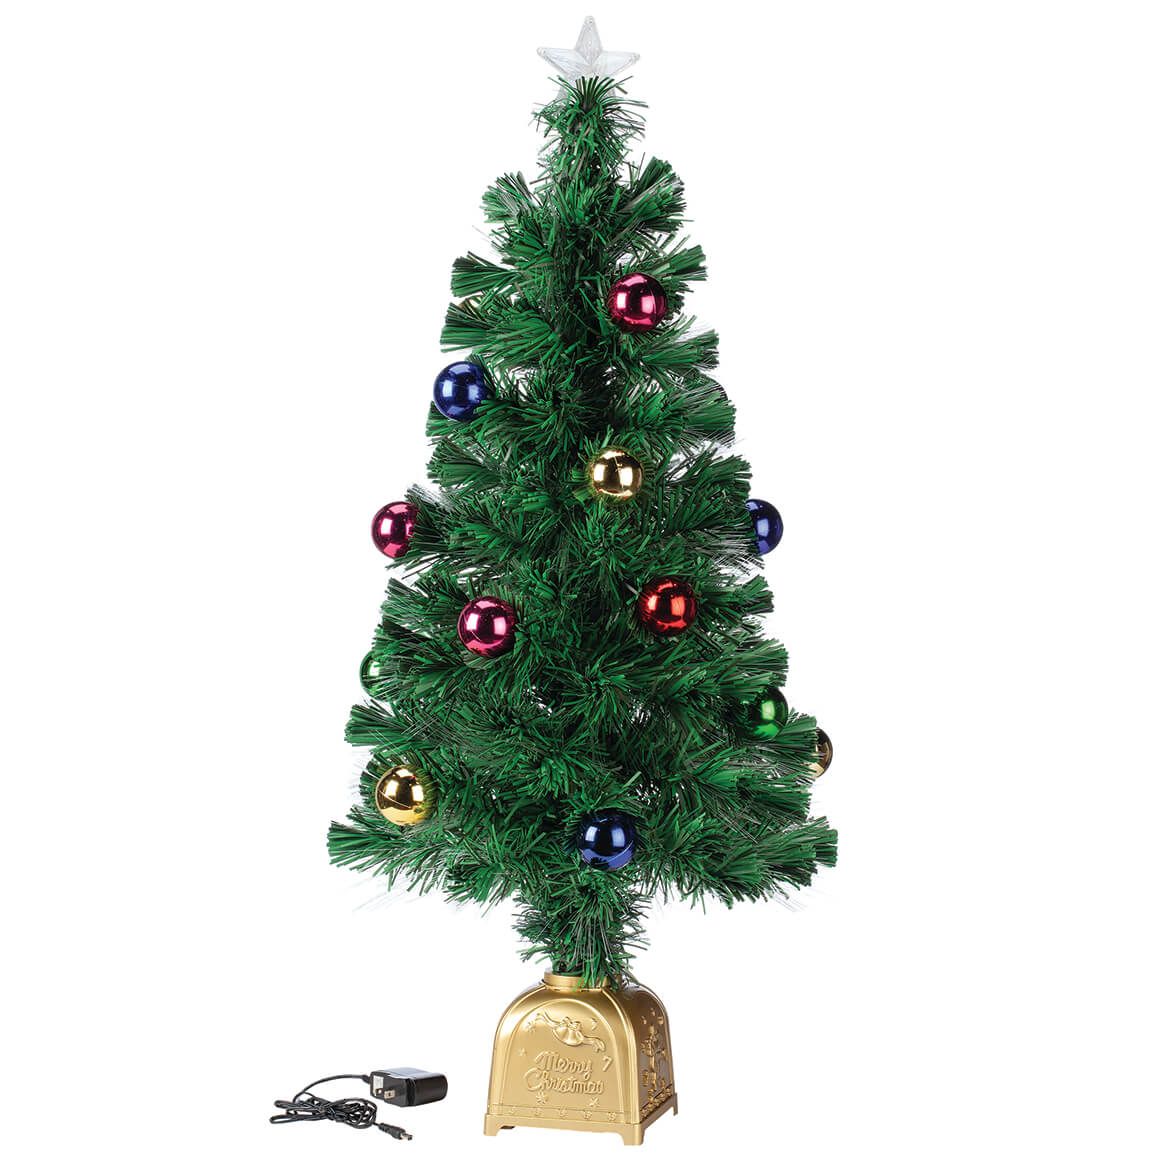 Musical Spinning Bluetooth Tree By Holiday Peak™ + '-' + 375866